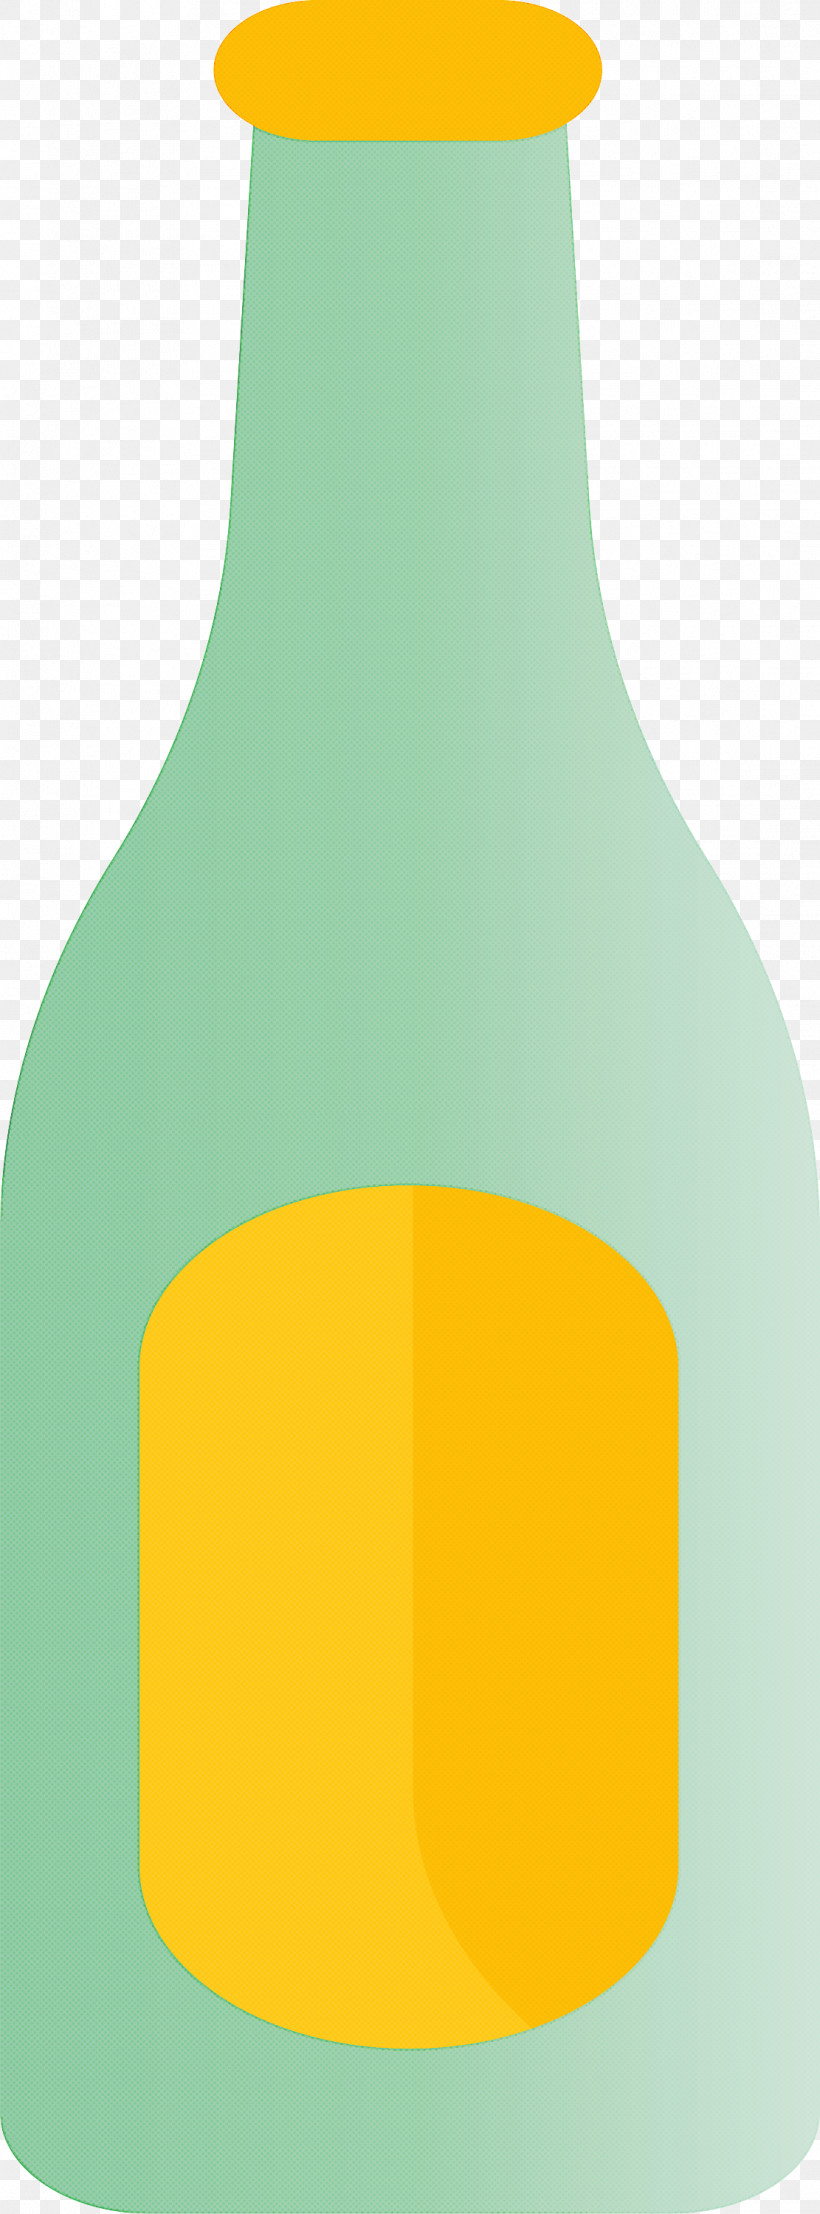 Glass Bottle Yellow Angle Glass Font, PNG, 1111x3000px, Glass Bottle, Angle, Bottle, Glass, Liquidm Inc Download Free